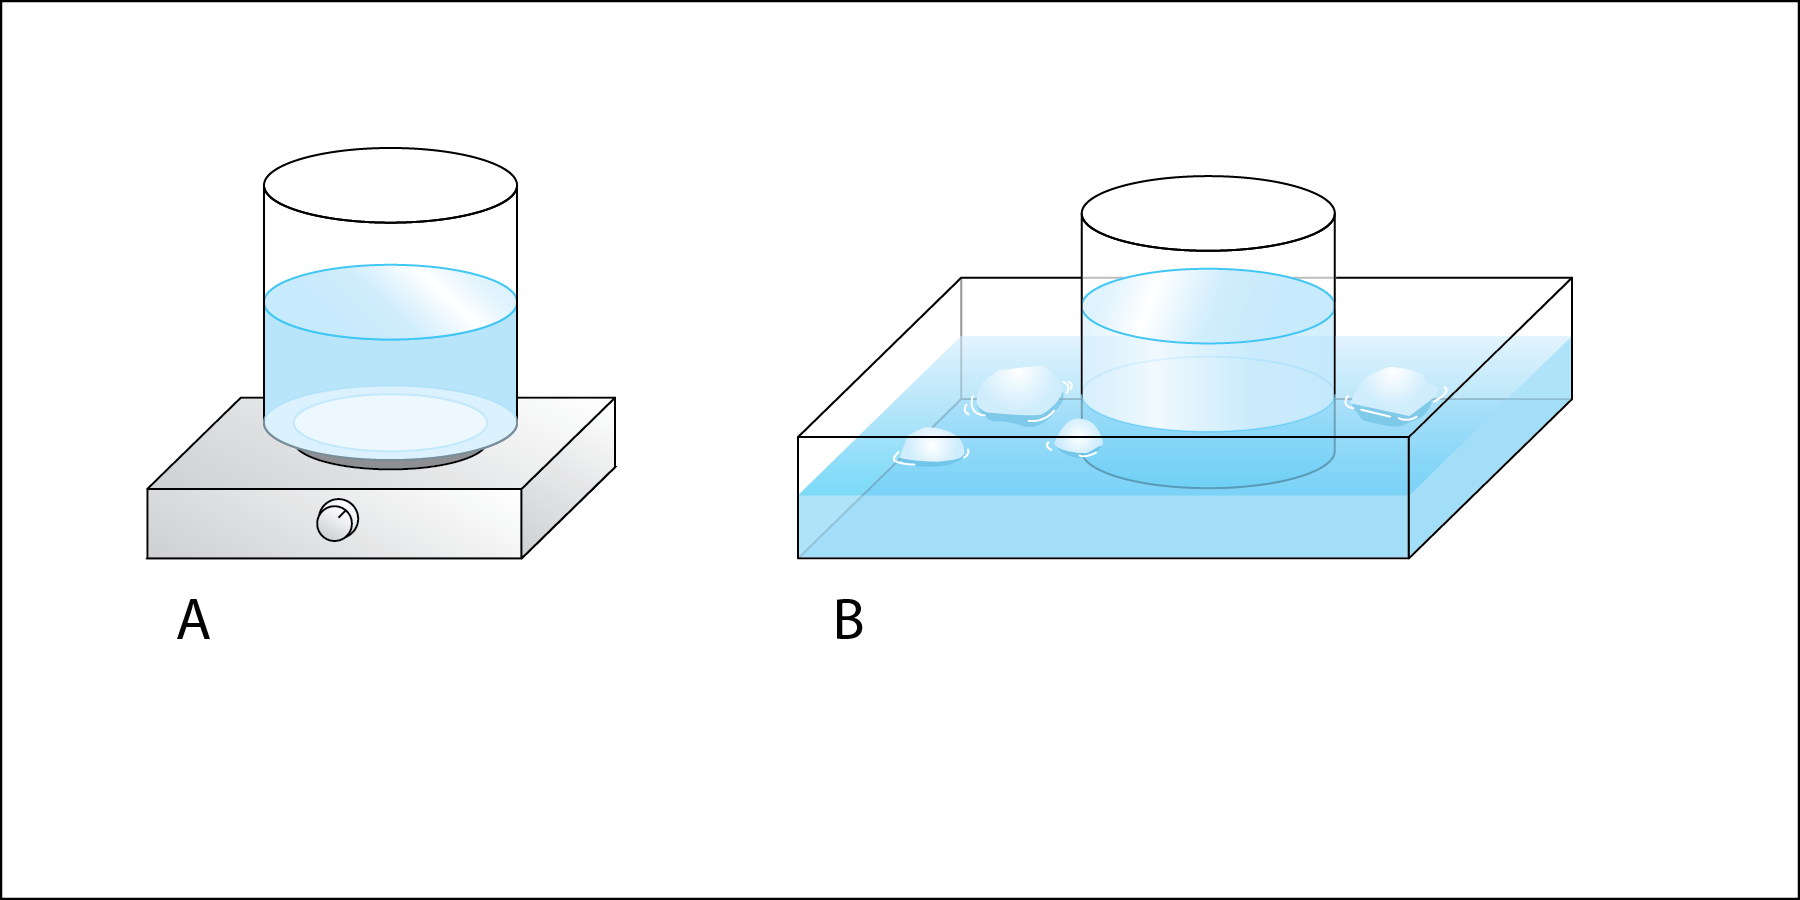 <p><strong>Fig. 2.4</strong>. (<strong>A</strong>) Place a beaker of water on a hot plate to create hot water.(<strong>B</strong>) Place water and ice cubes in a tray to create an ice bath. Place a beaker of water in the ice bath to create cold water.</p>